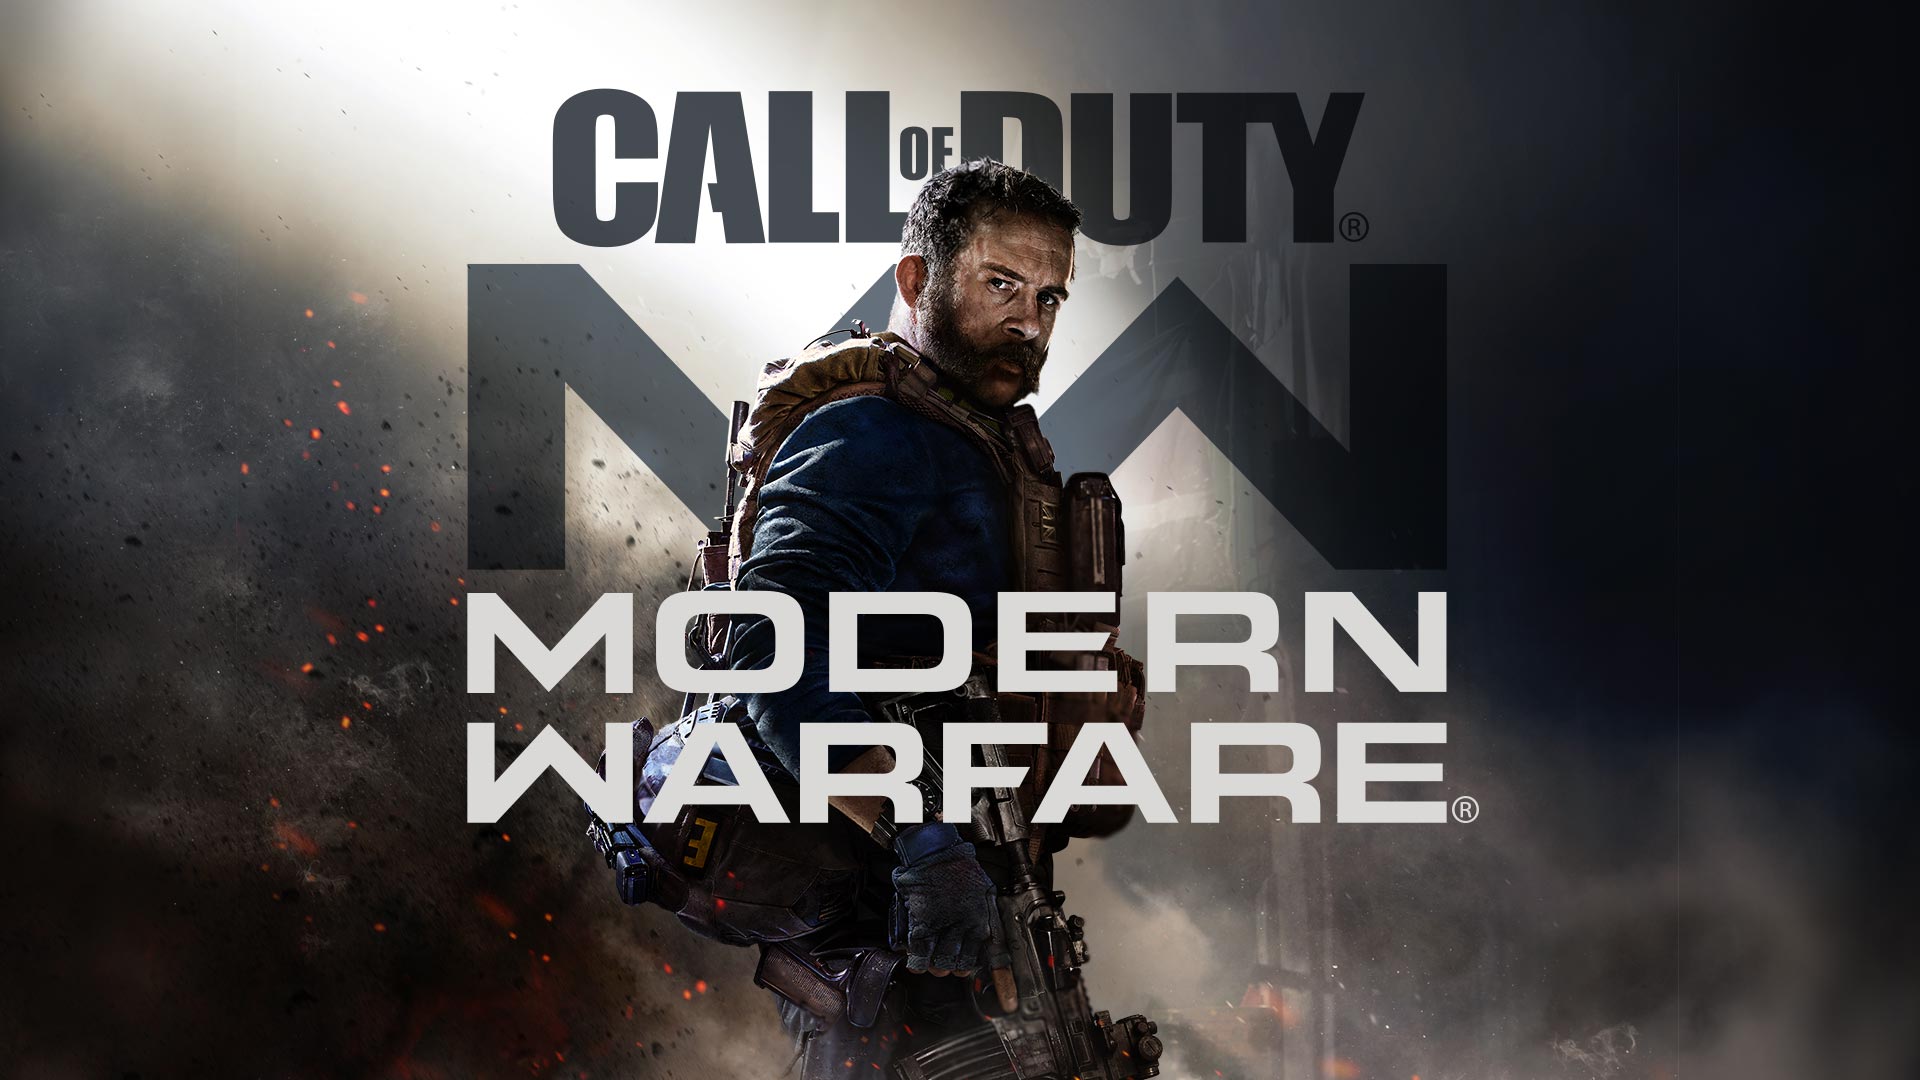 Play COD with mouse and keyboard on PS4 or XBOX